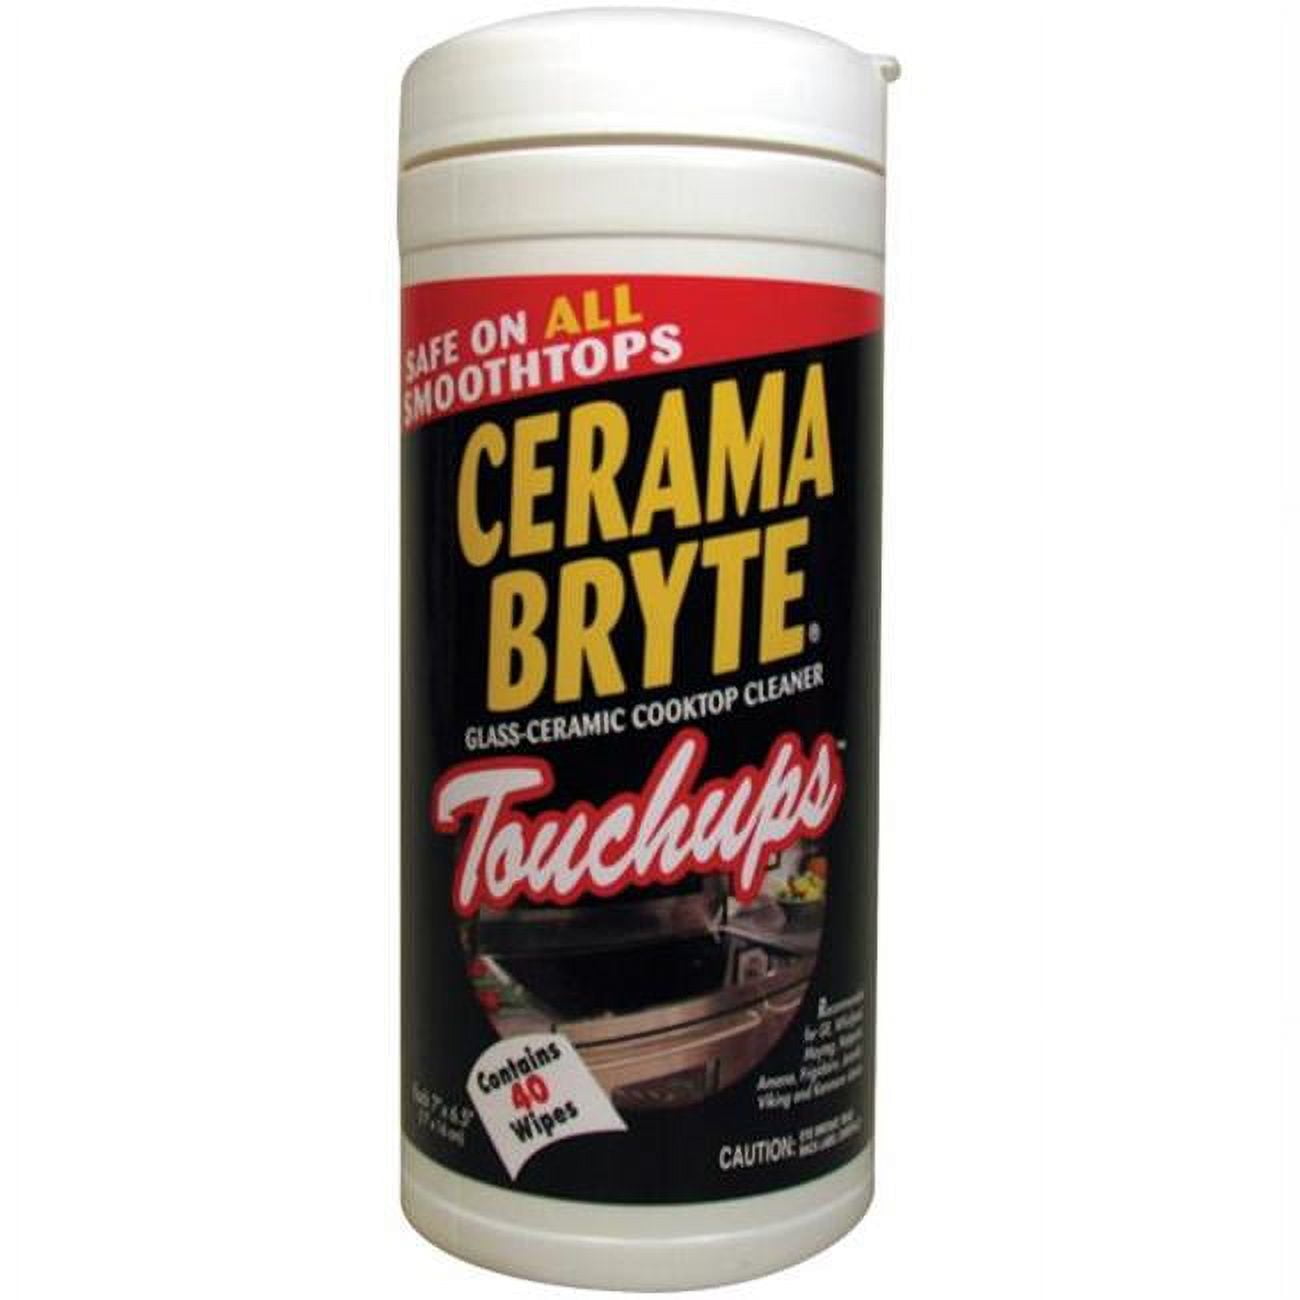 Cerama bryte 48635 Stainless Steel Cleaning Wipes 35 ct Ready To